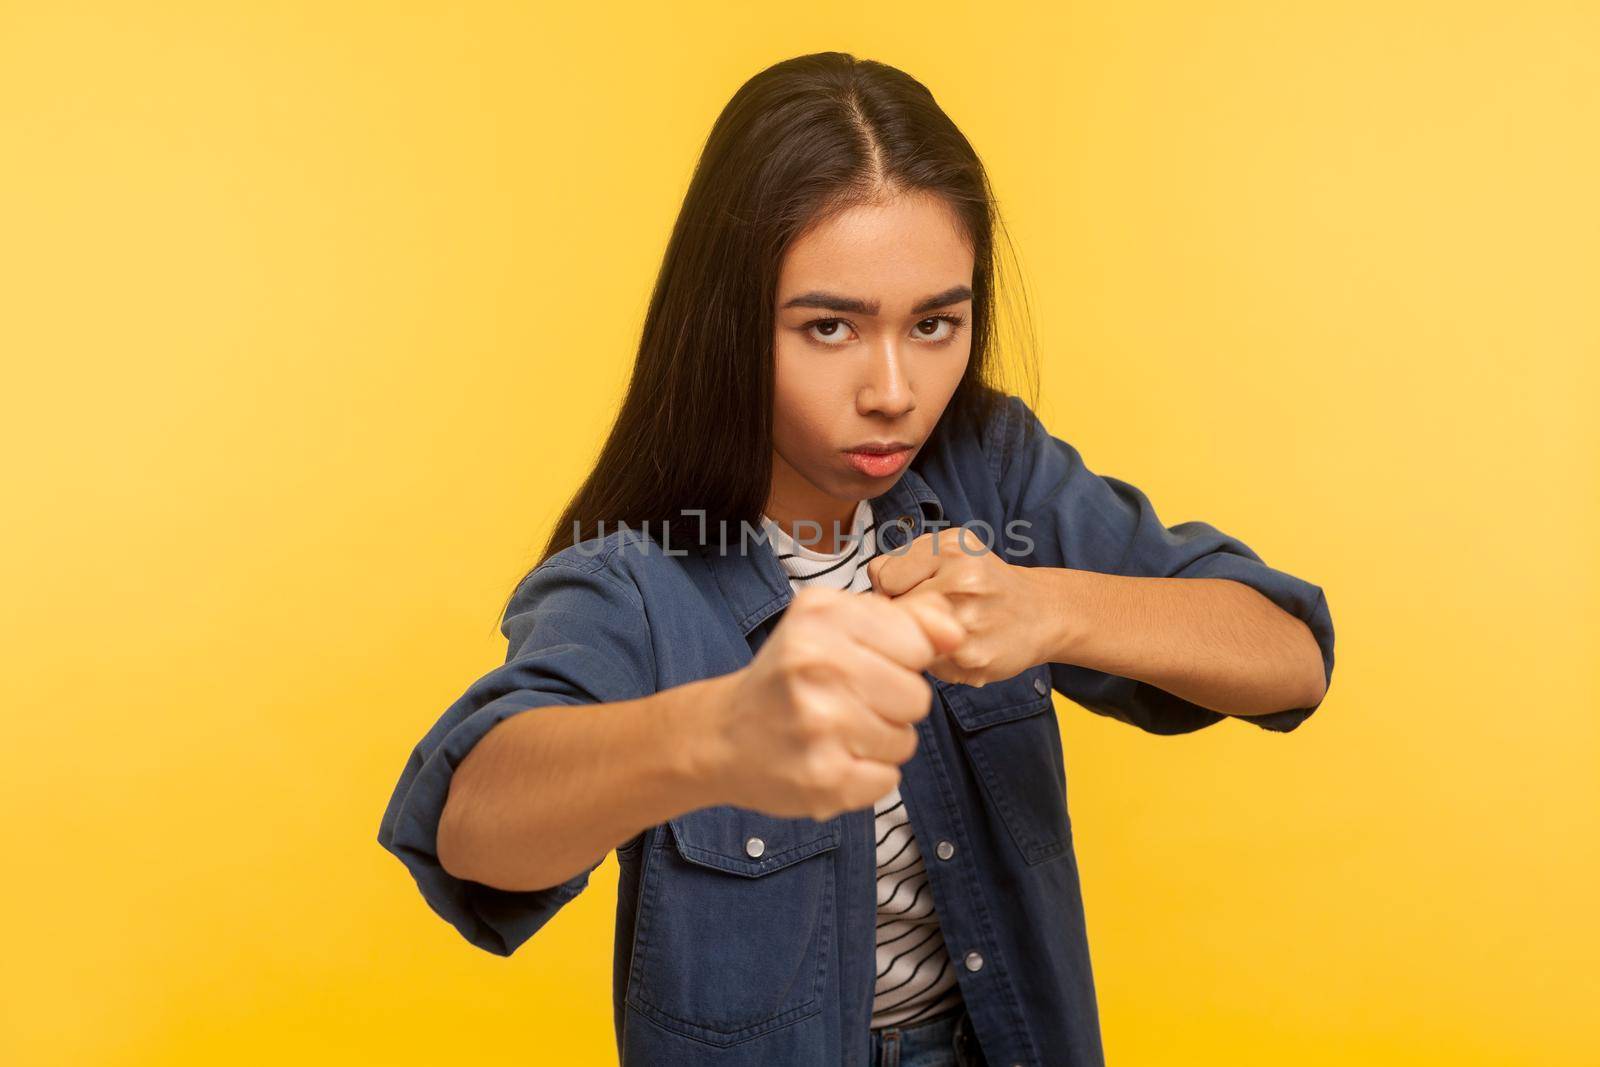 Let's fight. Portrait of confident courageous girl in denim shirt keeping fists clenched, boxing and punching at camera, her look expressing anger fury. studio shot isolated on yellow background